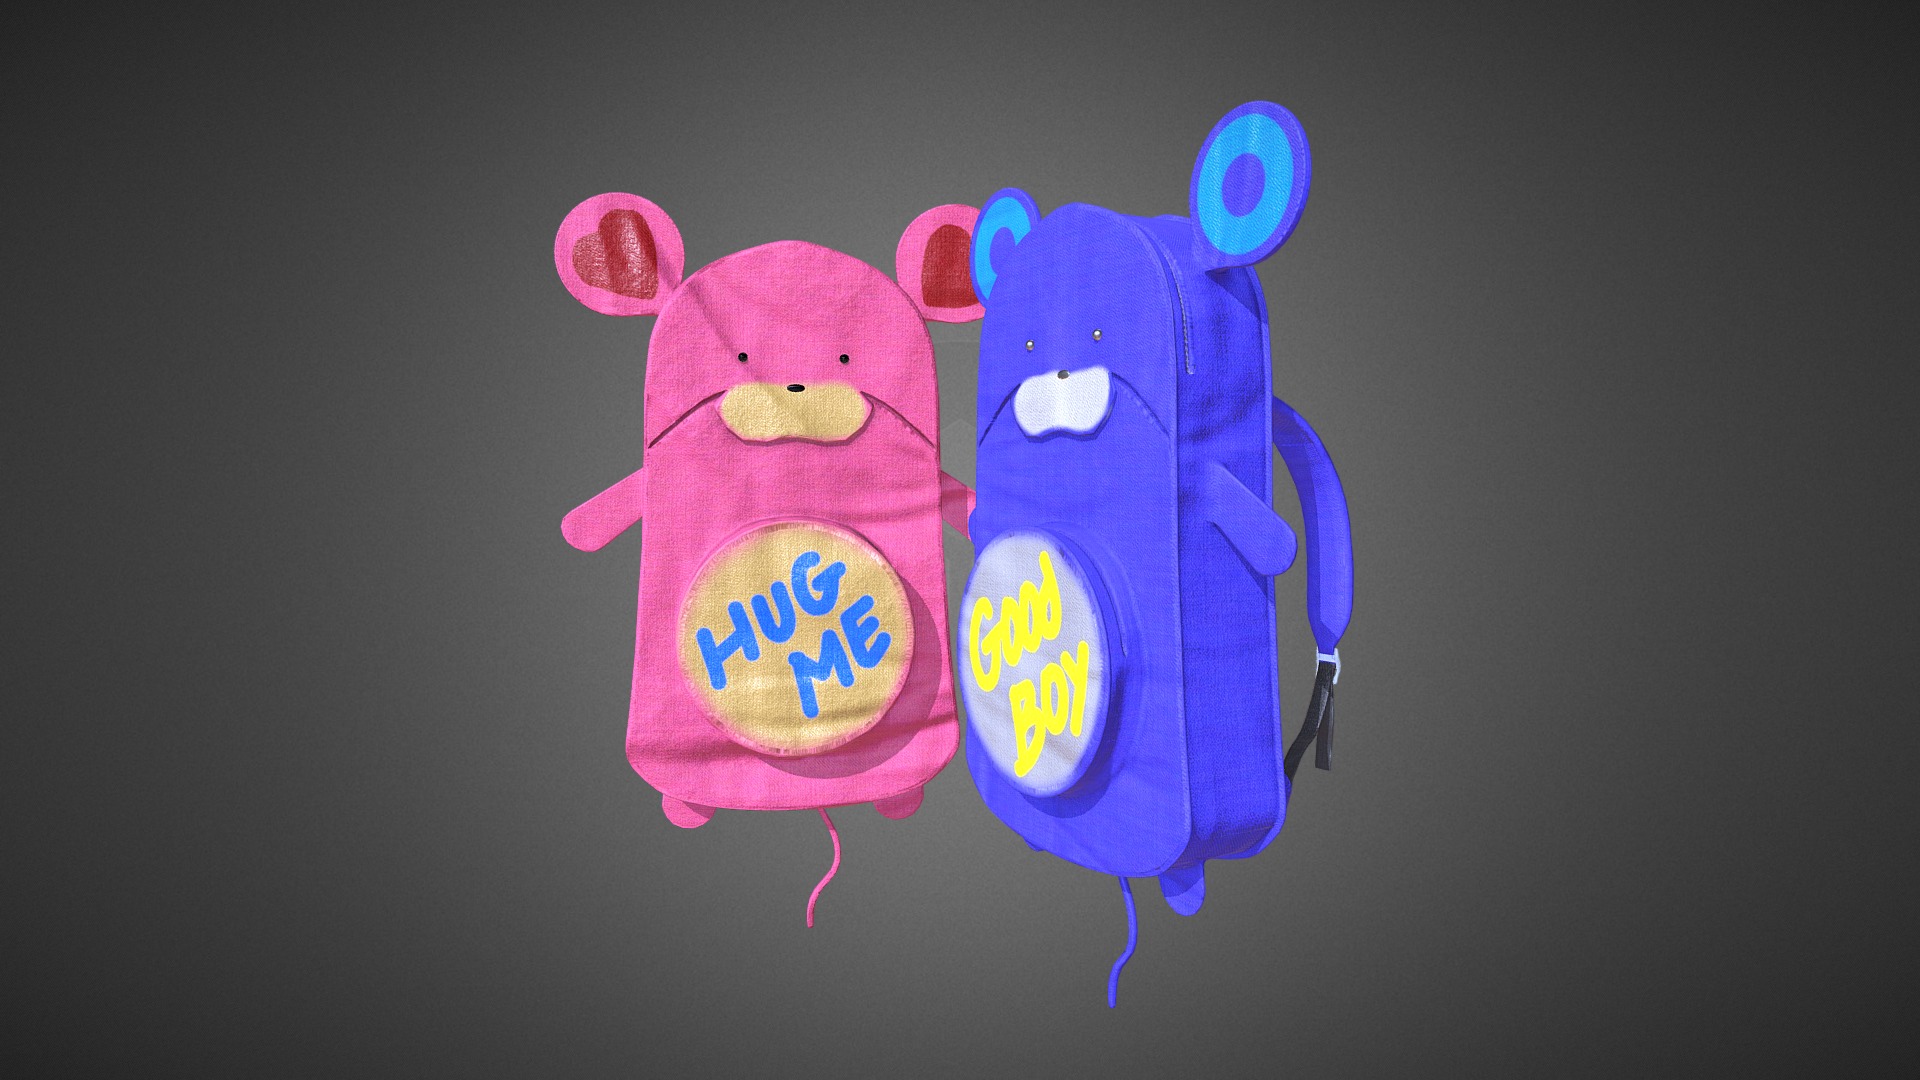 3D model mouse modeled child’s bag - This is a 3D model of the mouse modeled child's bag. The 3D model is about two stuffed animals with faces.